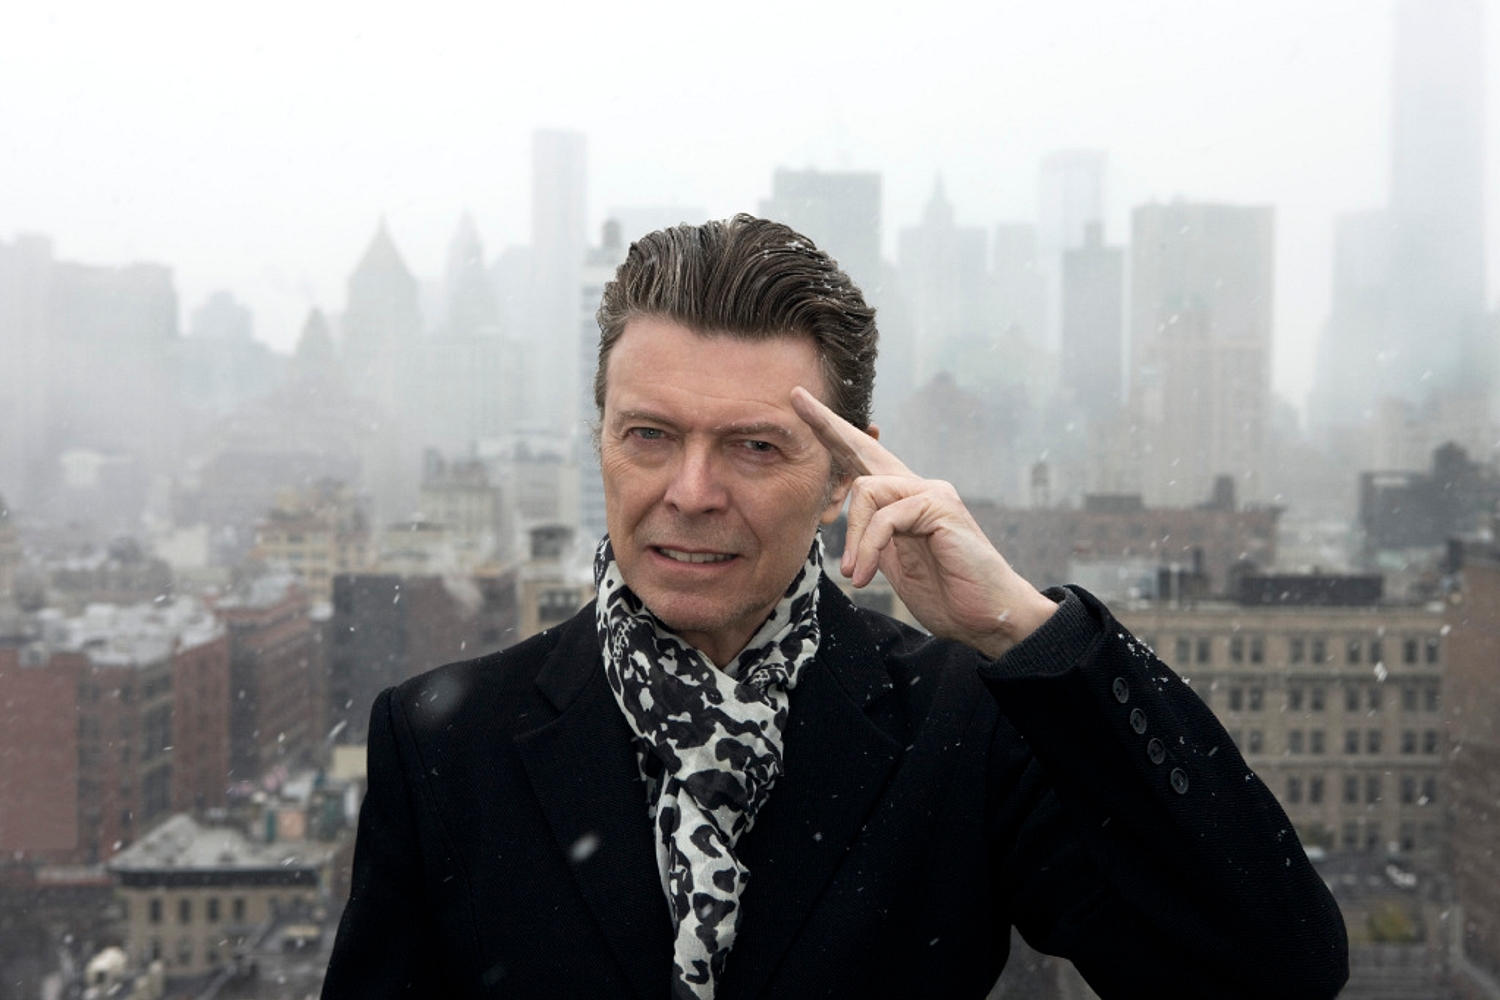 20th January is officially David Bowie Day in New York